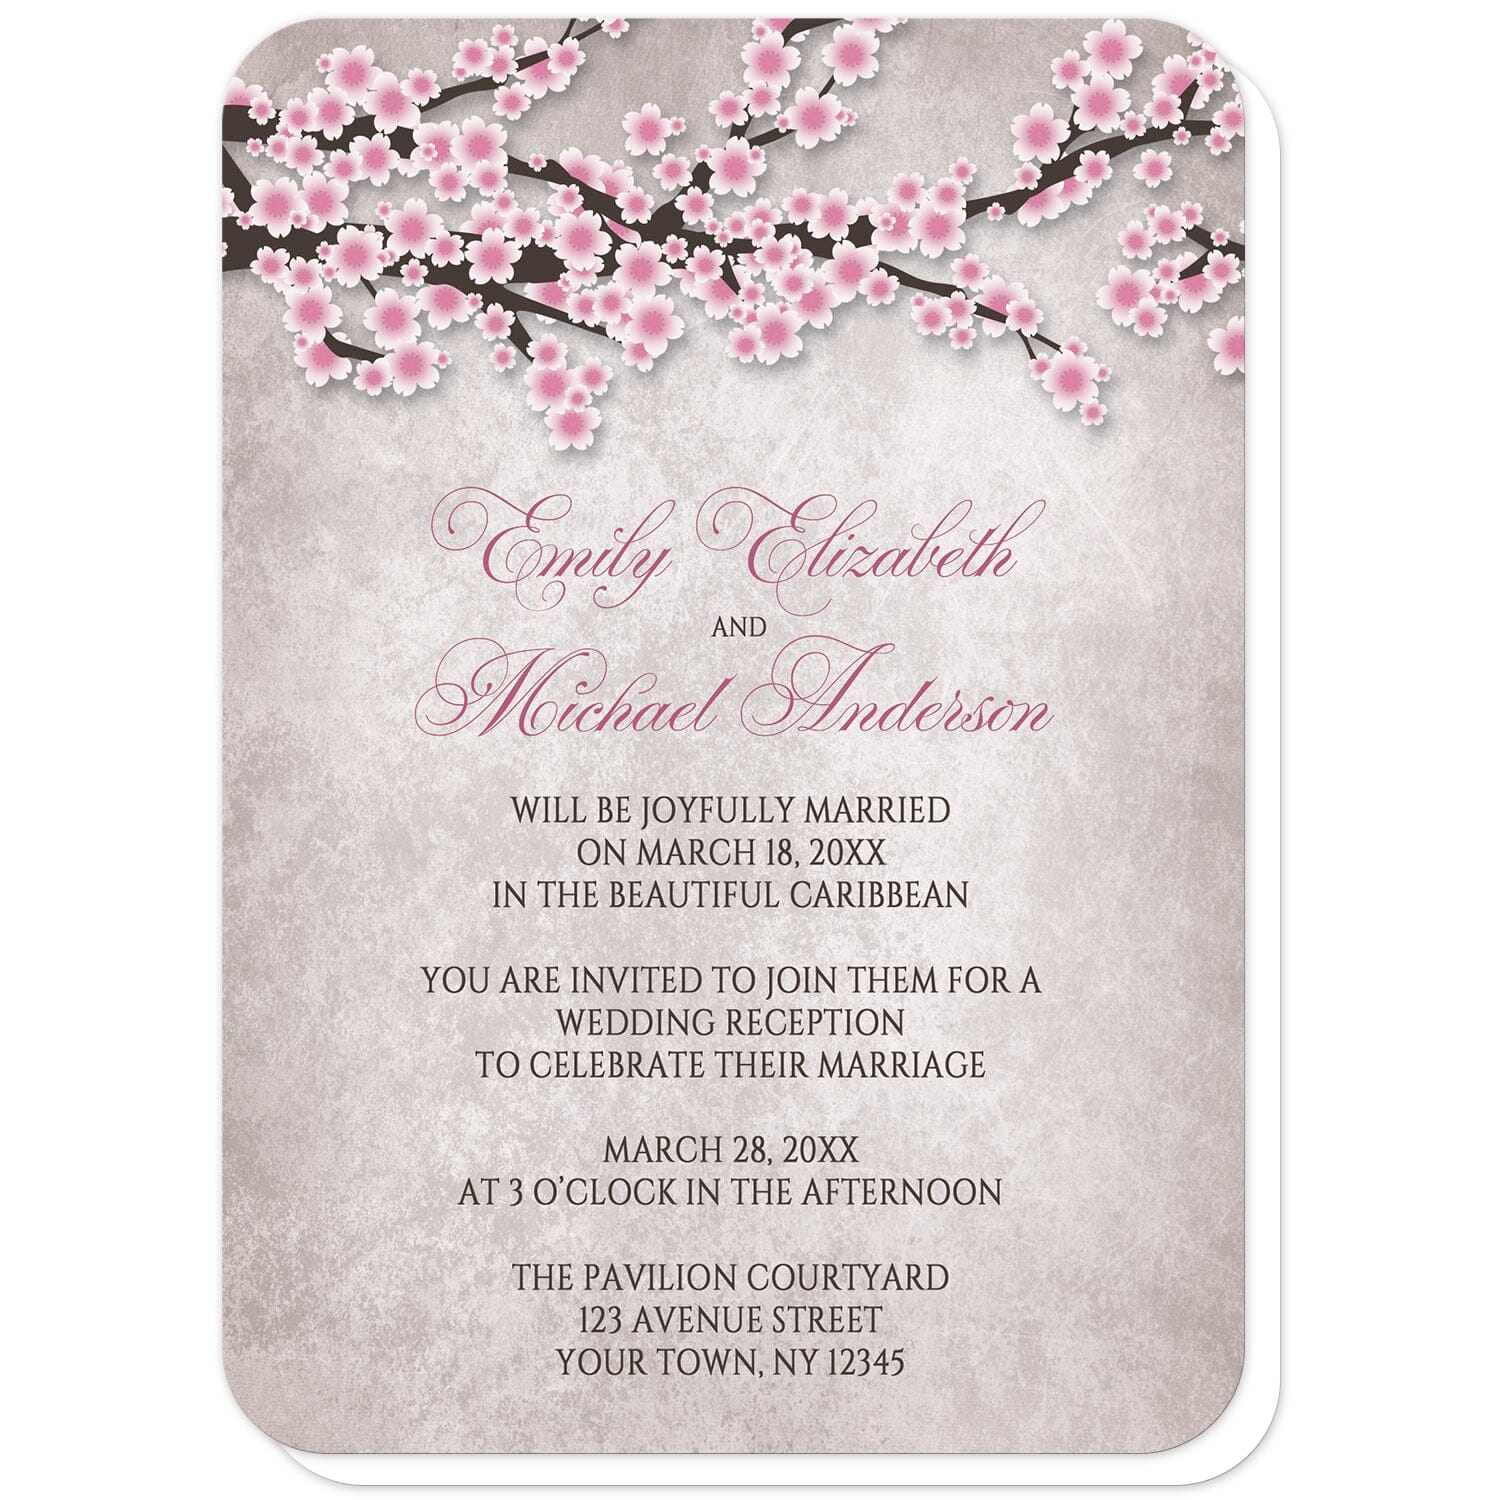 Rustic Pink Cherry Blossom Reception Only Invitations (with rounded corners) at Artistically Invited. Rustic pink cherry blossom reception only invitations featuring an illustration of pink and white with dark brown cherry blossom branches along the top. Your personalized post-wedding reception details are custom printed in pink and dark brown over a stony grayish brown background below the pretty cherry blossom branches. 